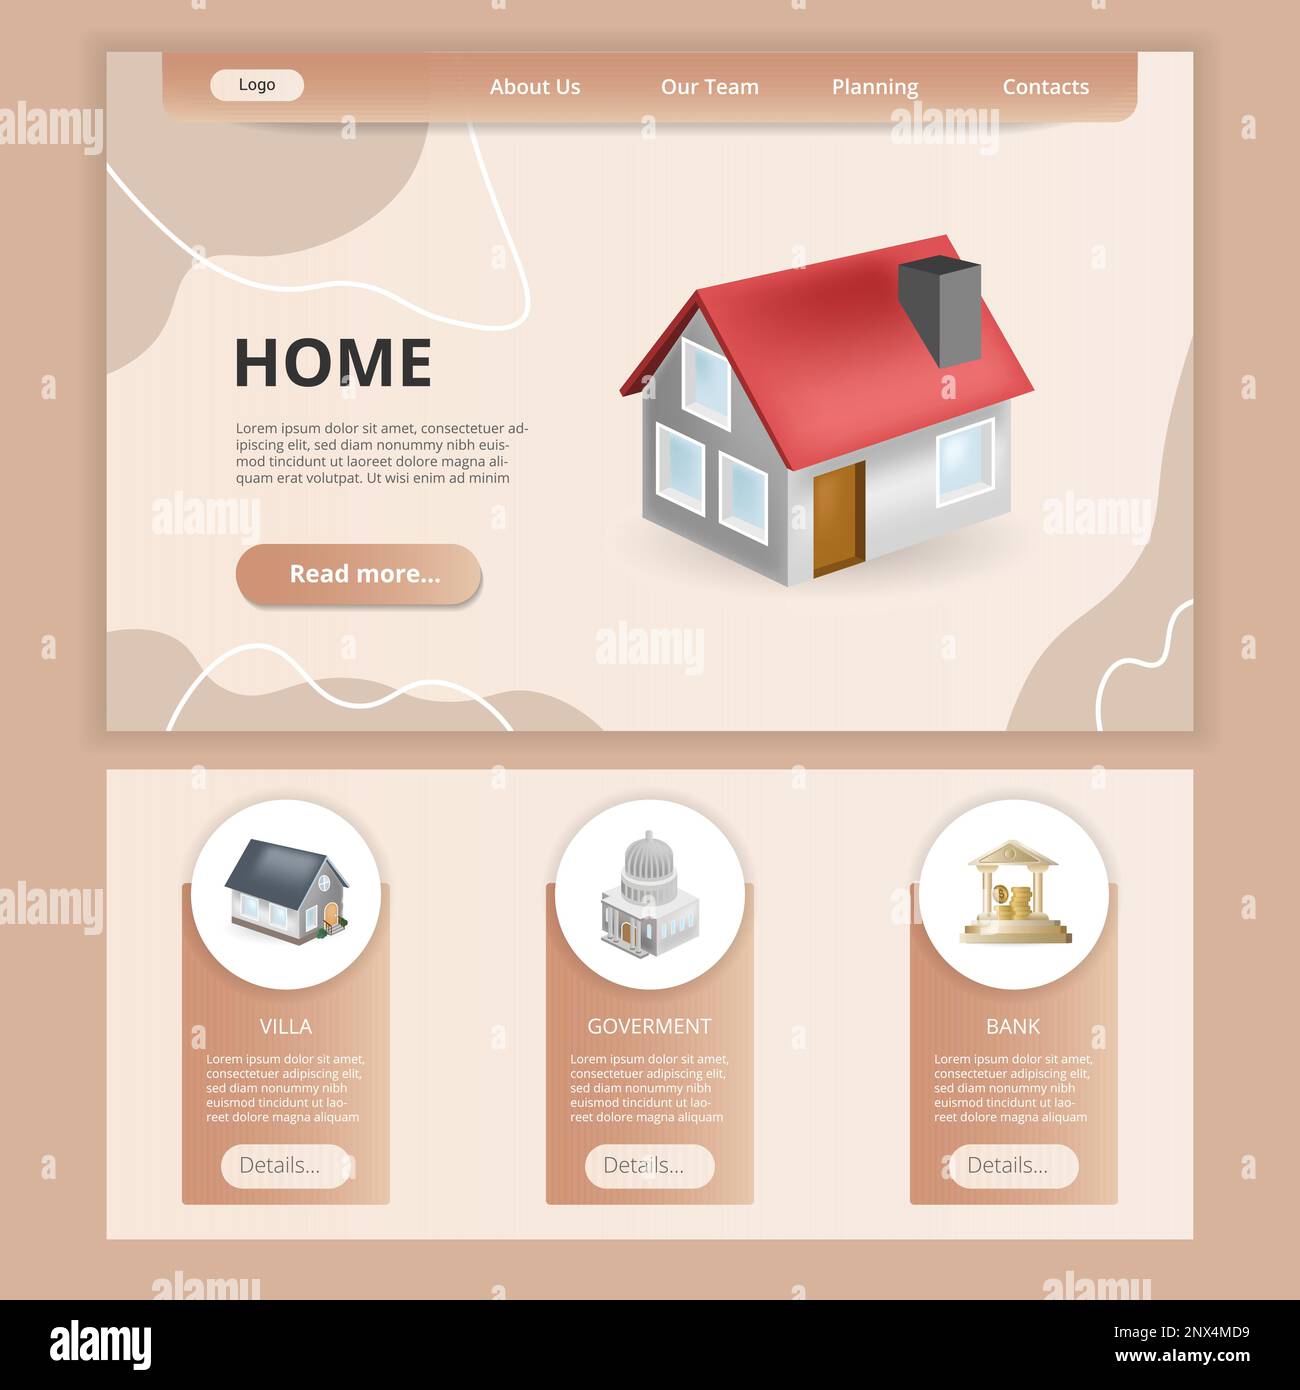 Home flat landing page website template. Villa, government, bank. Web banner with header, content and footer. Vector illustration. Stock Vector